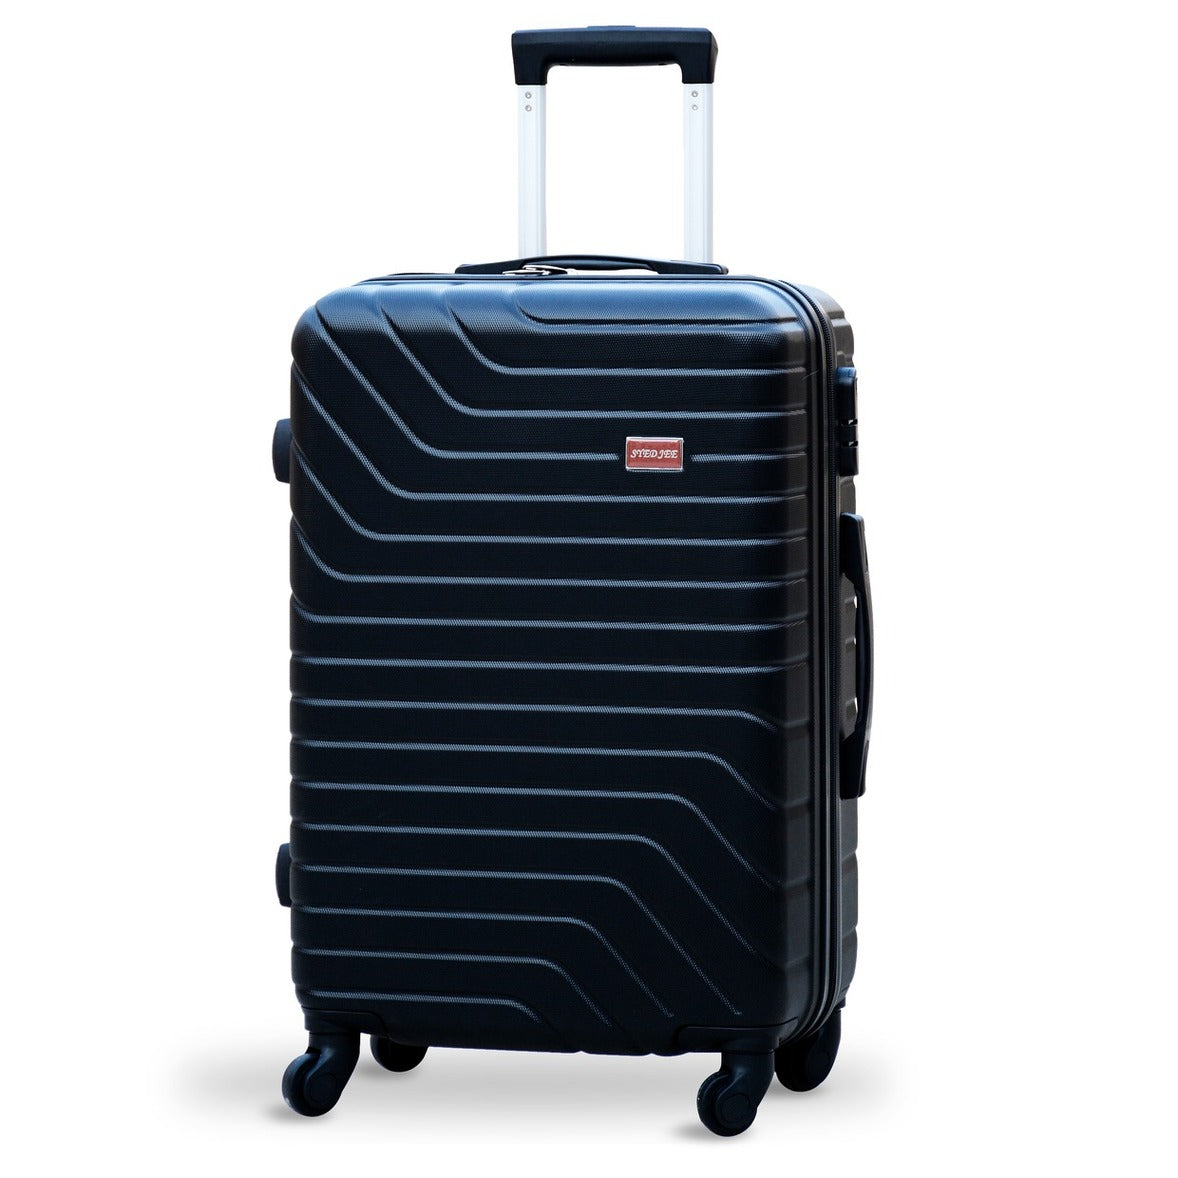 28" Black SJ ABS Lightweight Luggage Bag With Spinner Wheel